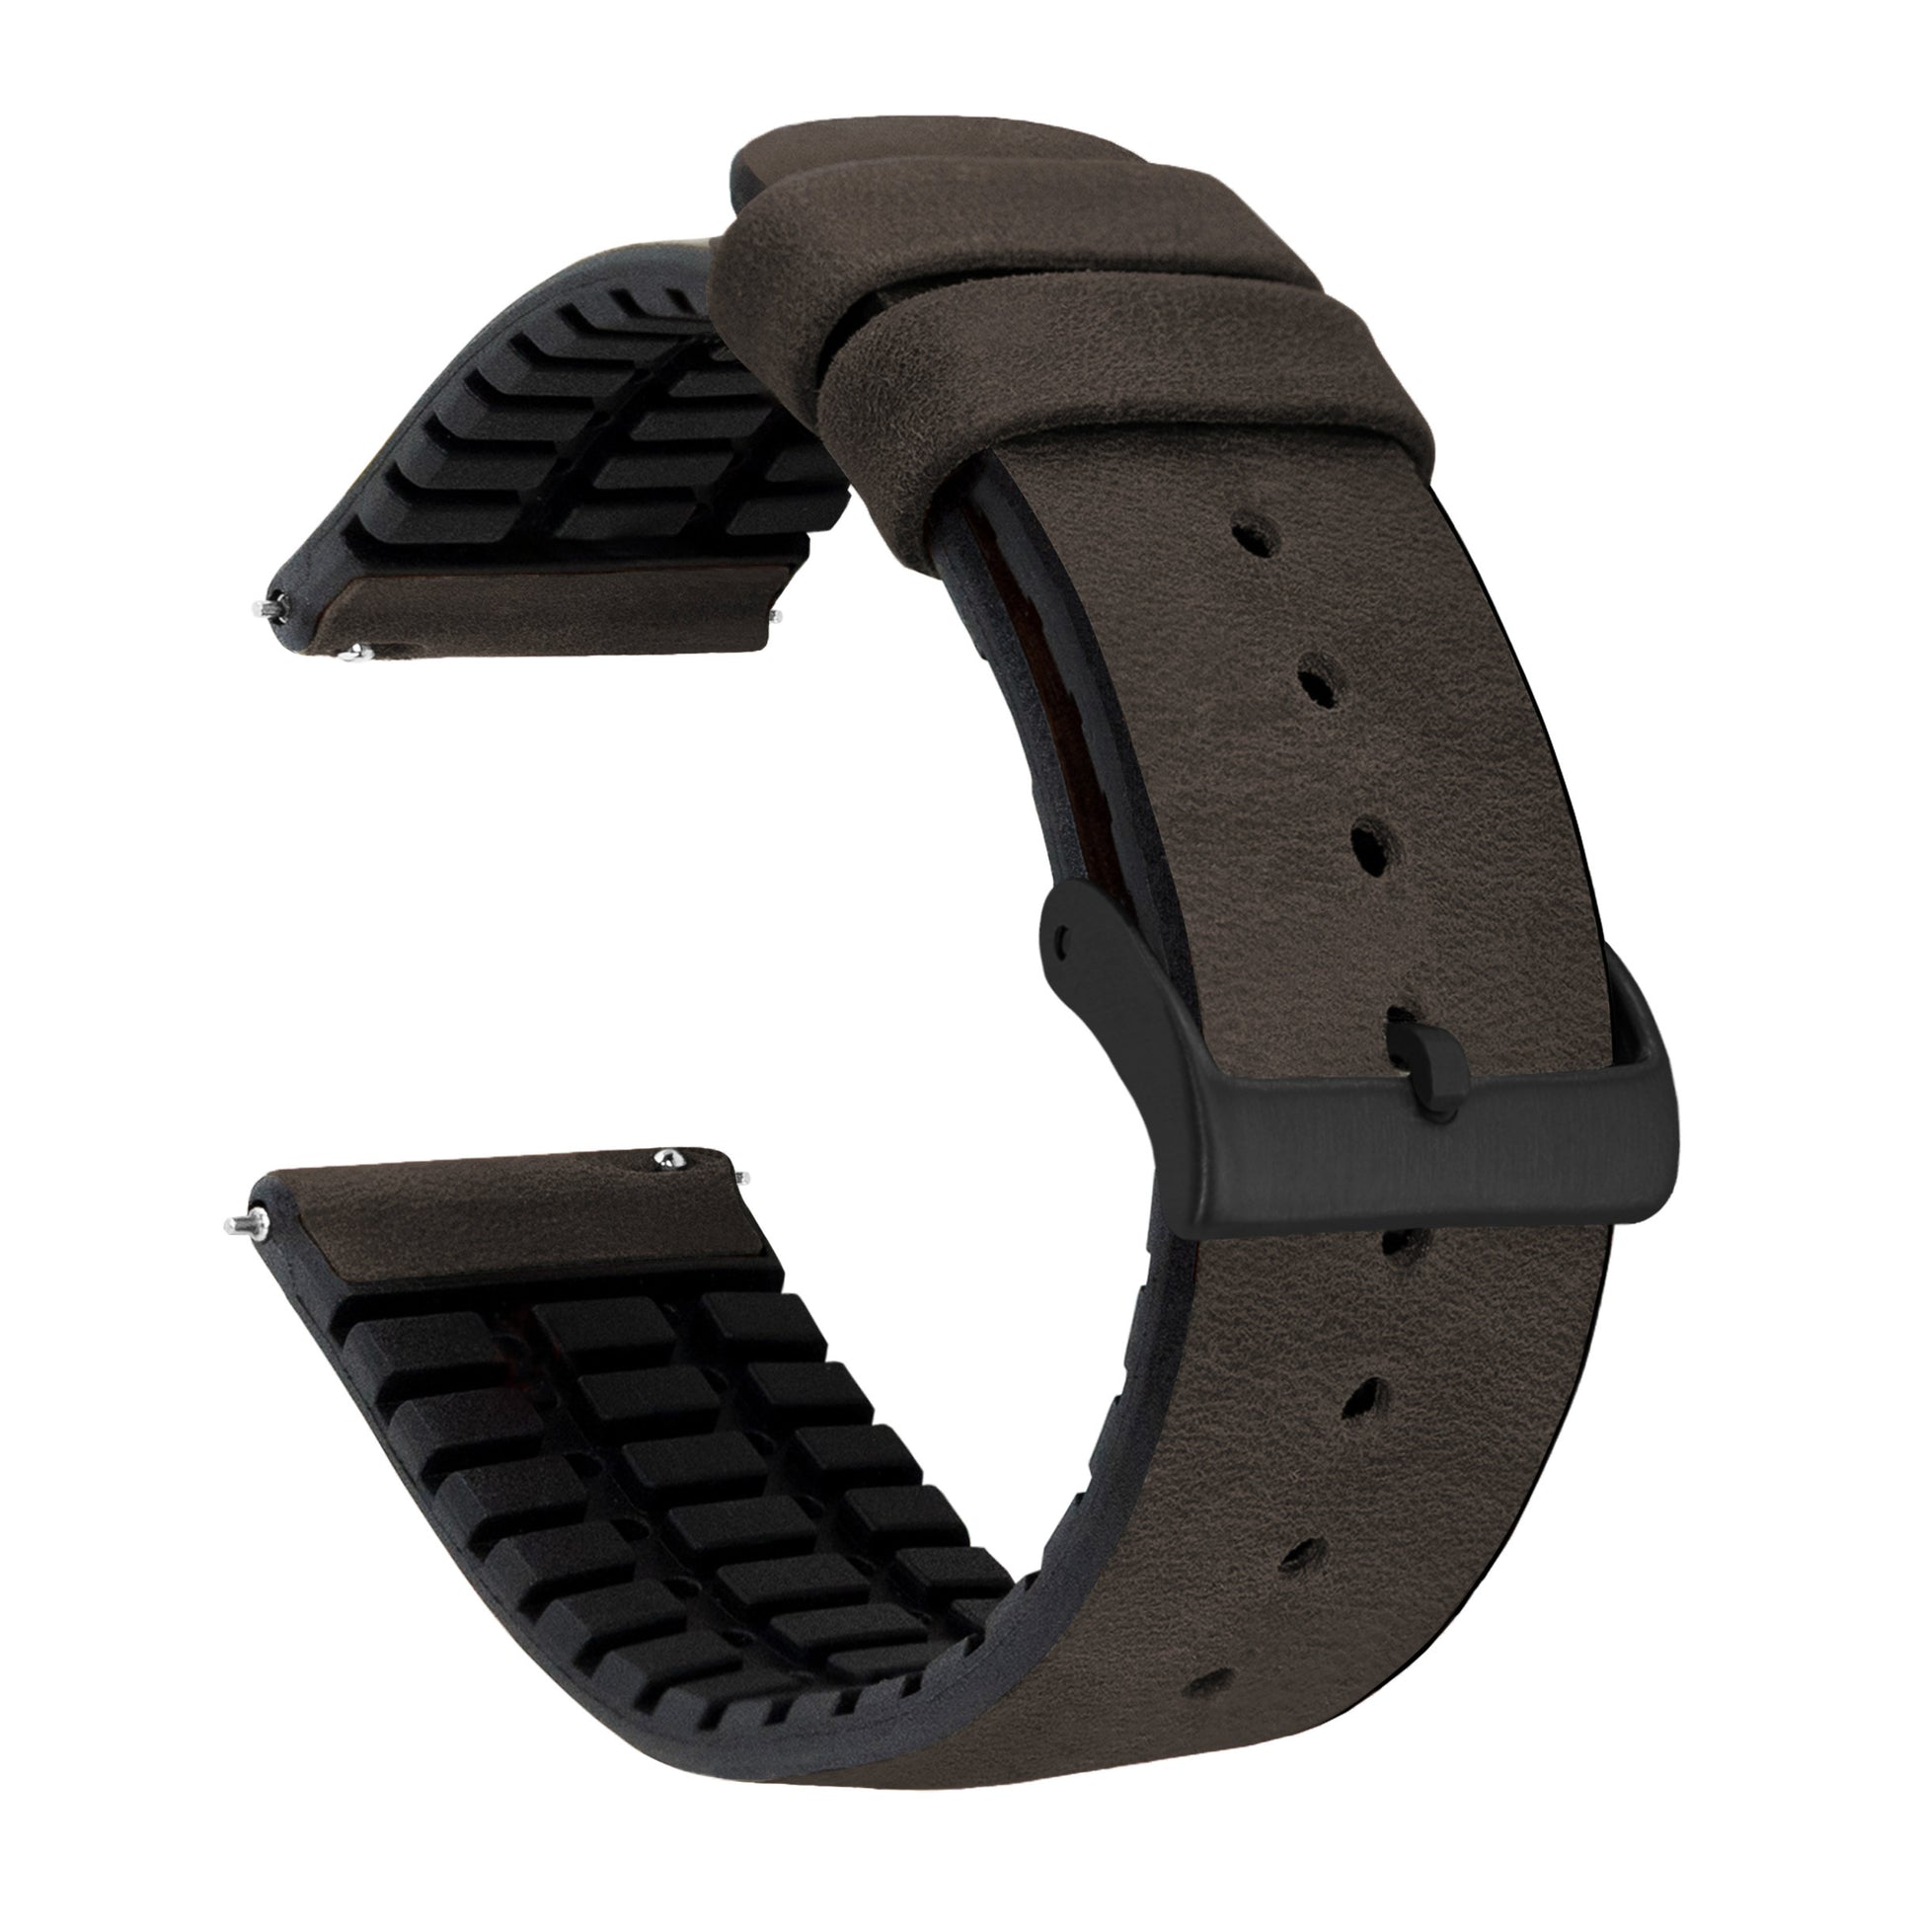 Fossil Sport | Leather and Rubber Hybrid | Smoke Brown - Barton Watch Bands